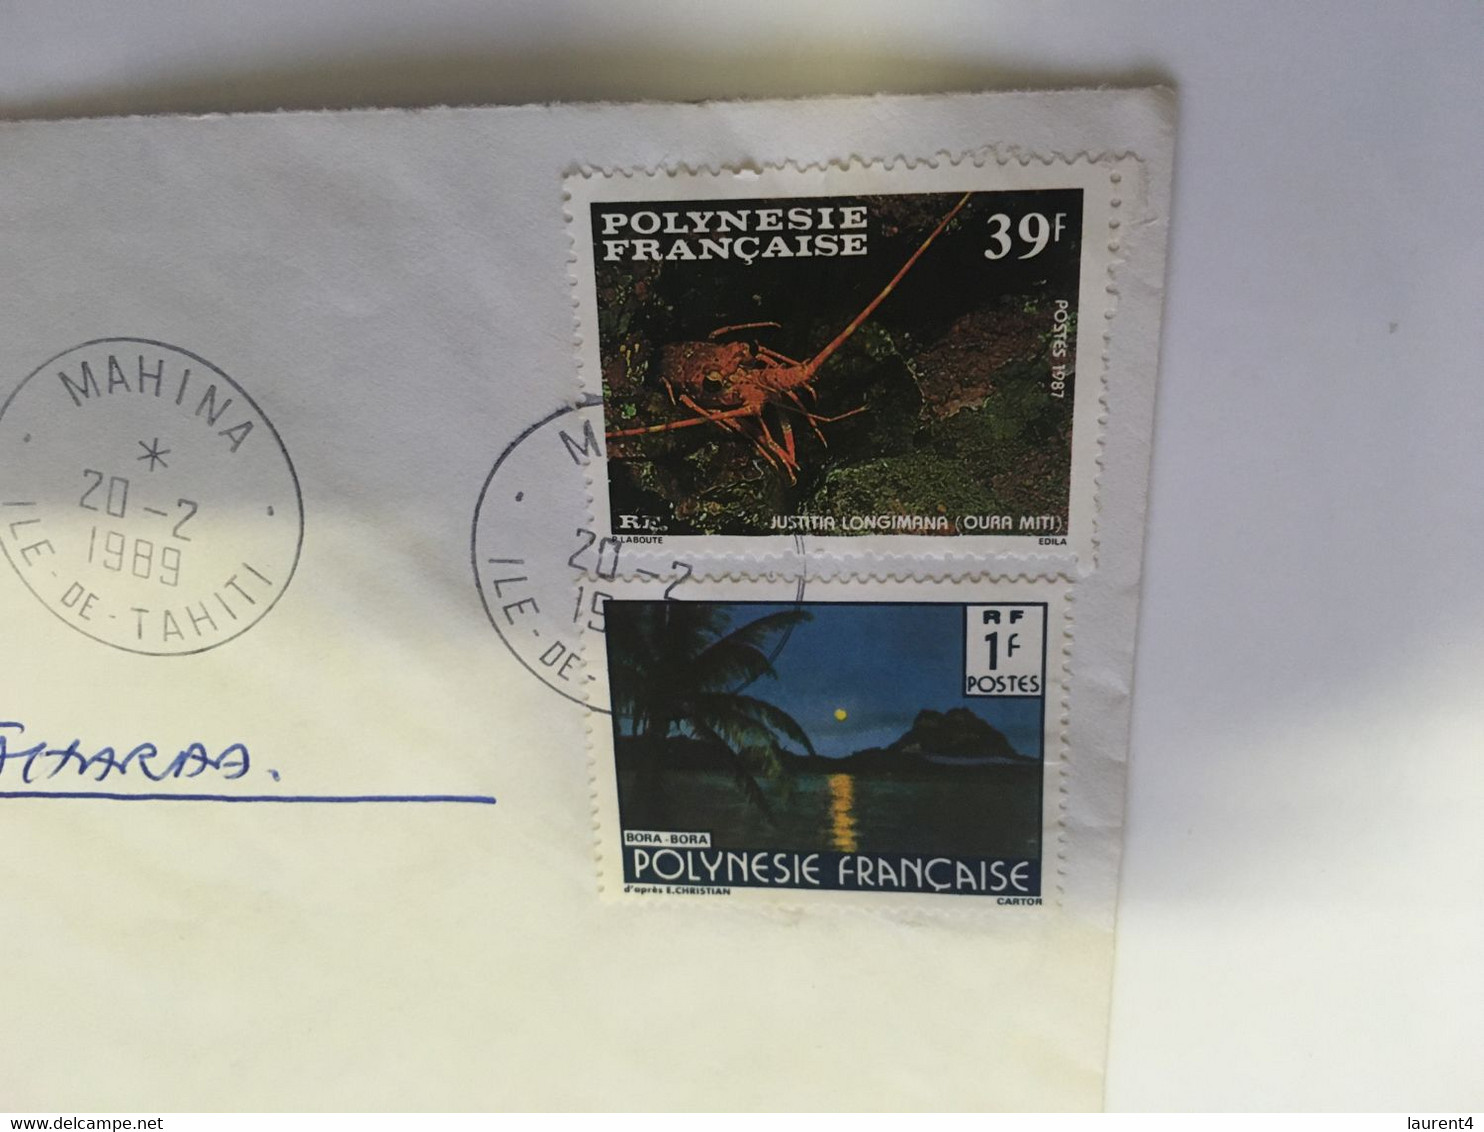 (SS 3) Polynesie Francçise  French Polynesia - 1989 =  2 Stamps On COMAT Cover - Covers & Documents